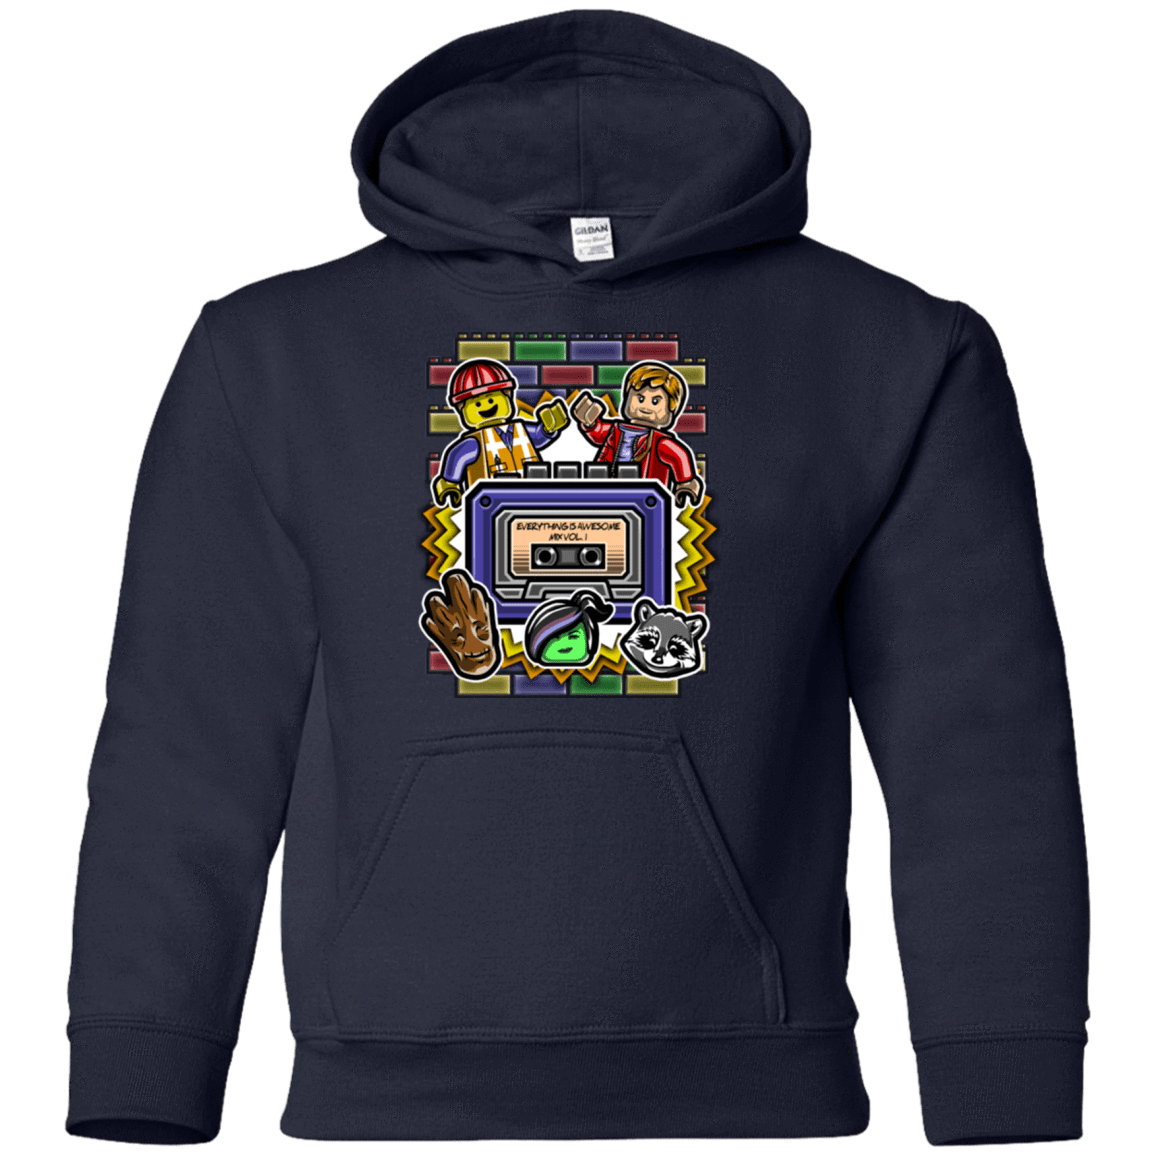 Sweatshirts Navy / YS Everything is awesome mix Youth Hoodie